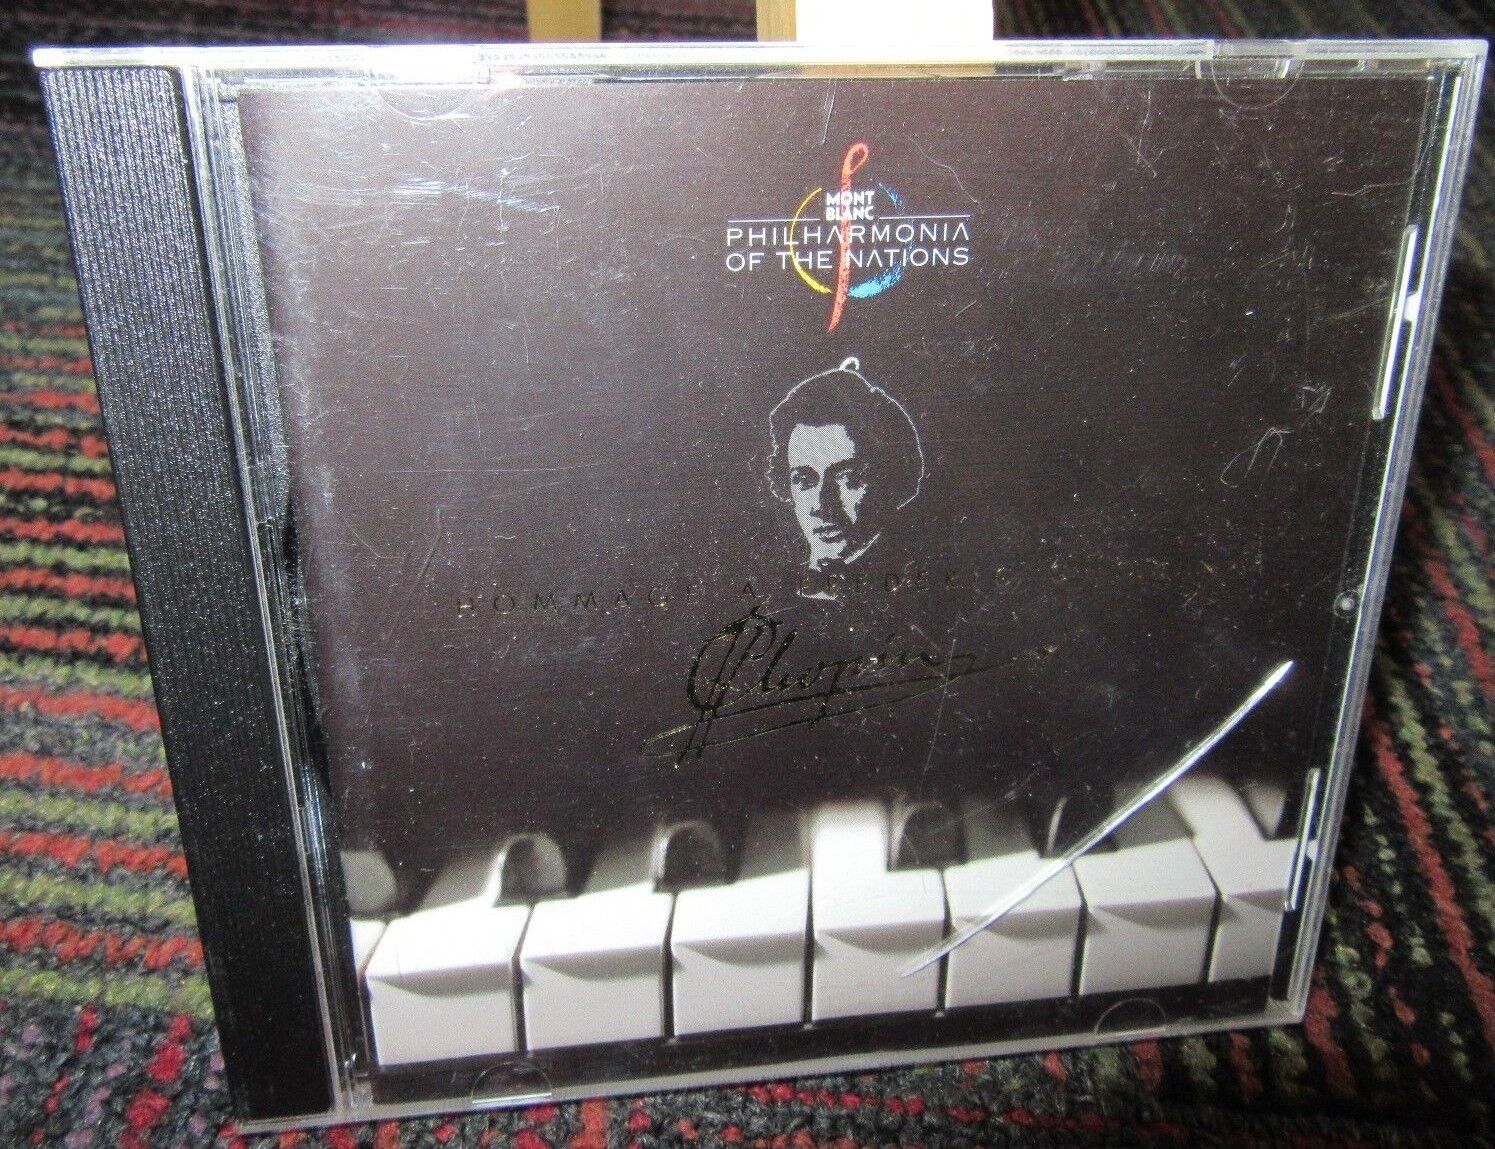 JUSTUS FRANTZ: MONTBLANC PHILHARMONIA OF THE NATIONS MUSIC CD, 6 GREAT TRACKS